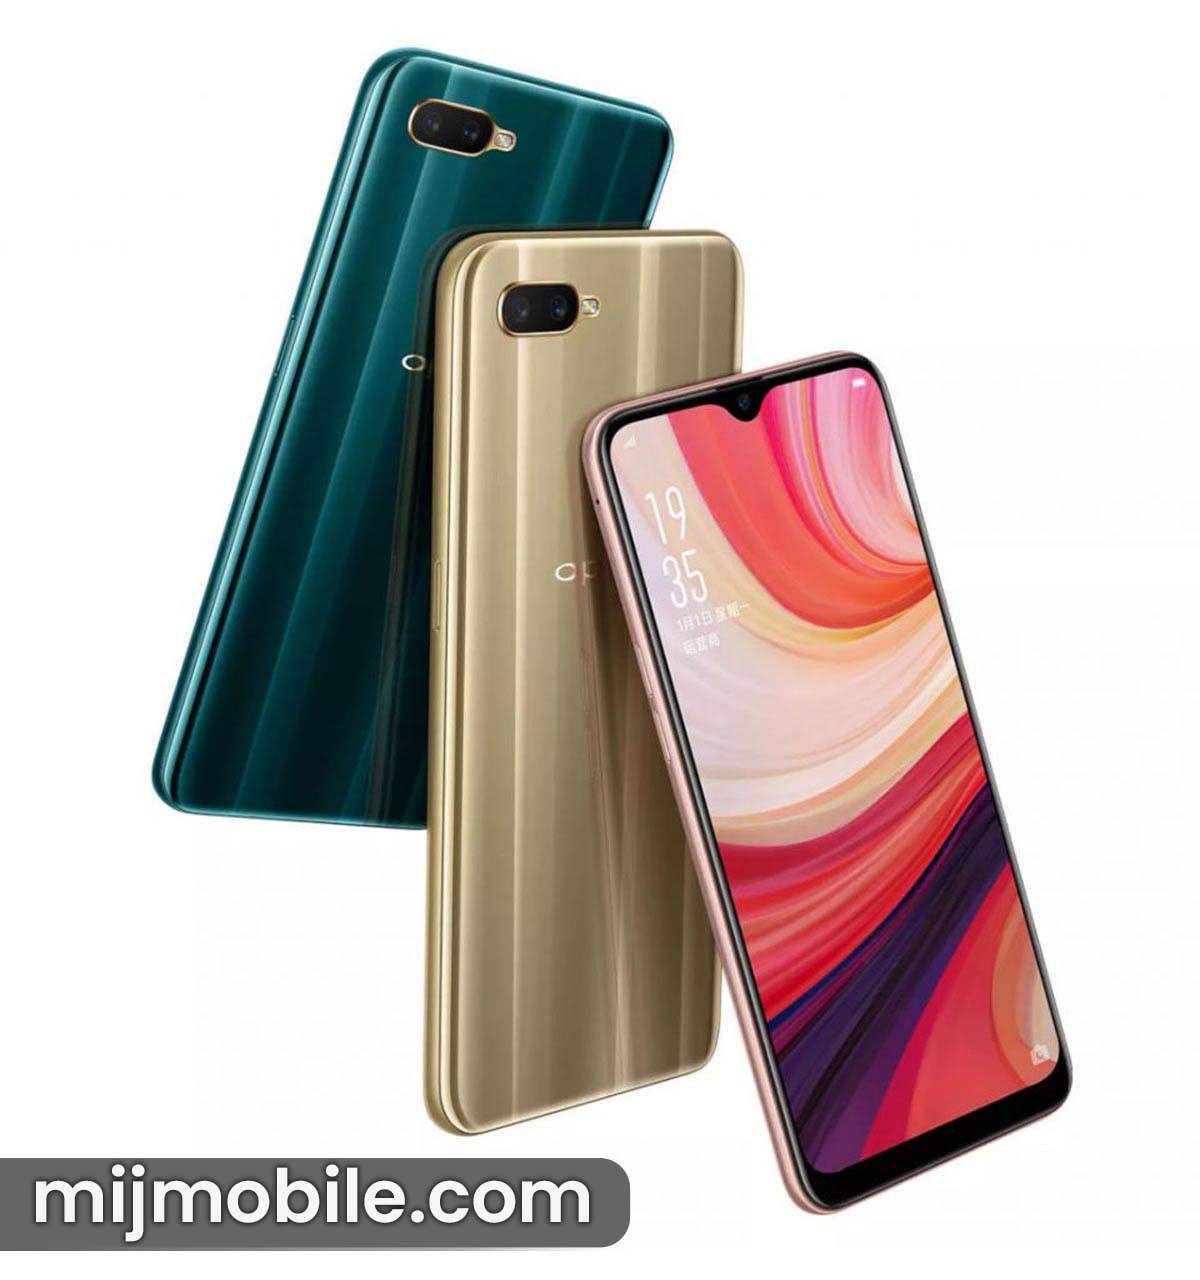 Oppo A7 Price in Pakistan & Specifications Oppo A7 Price in Pakistan is only 31,999.